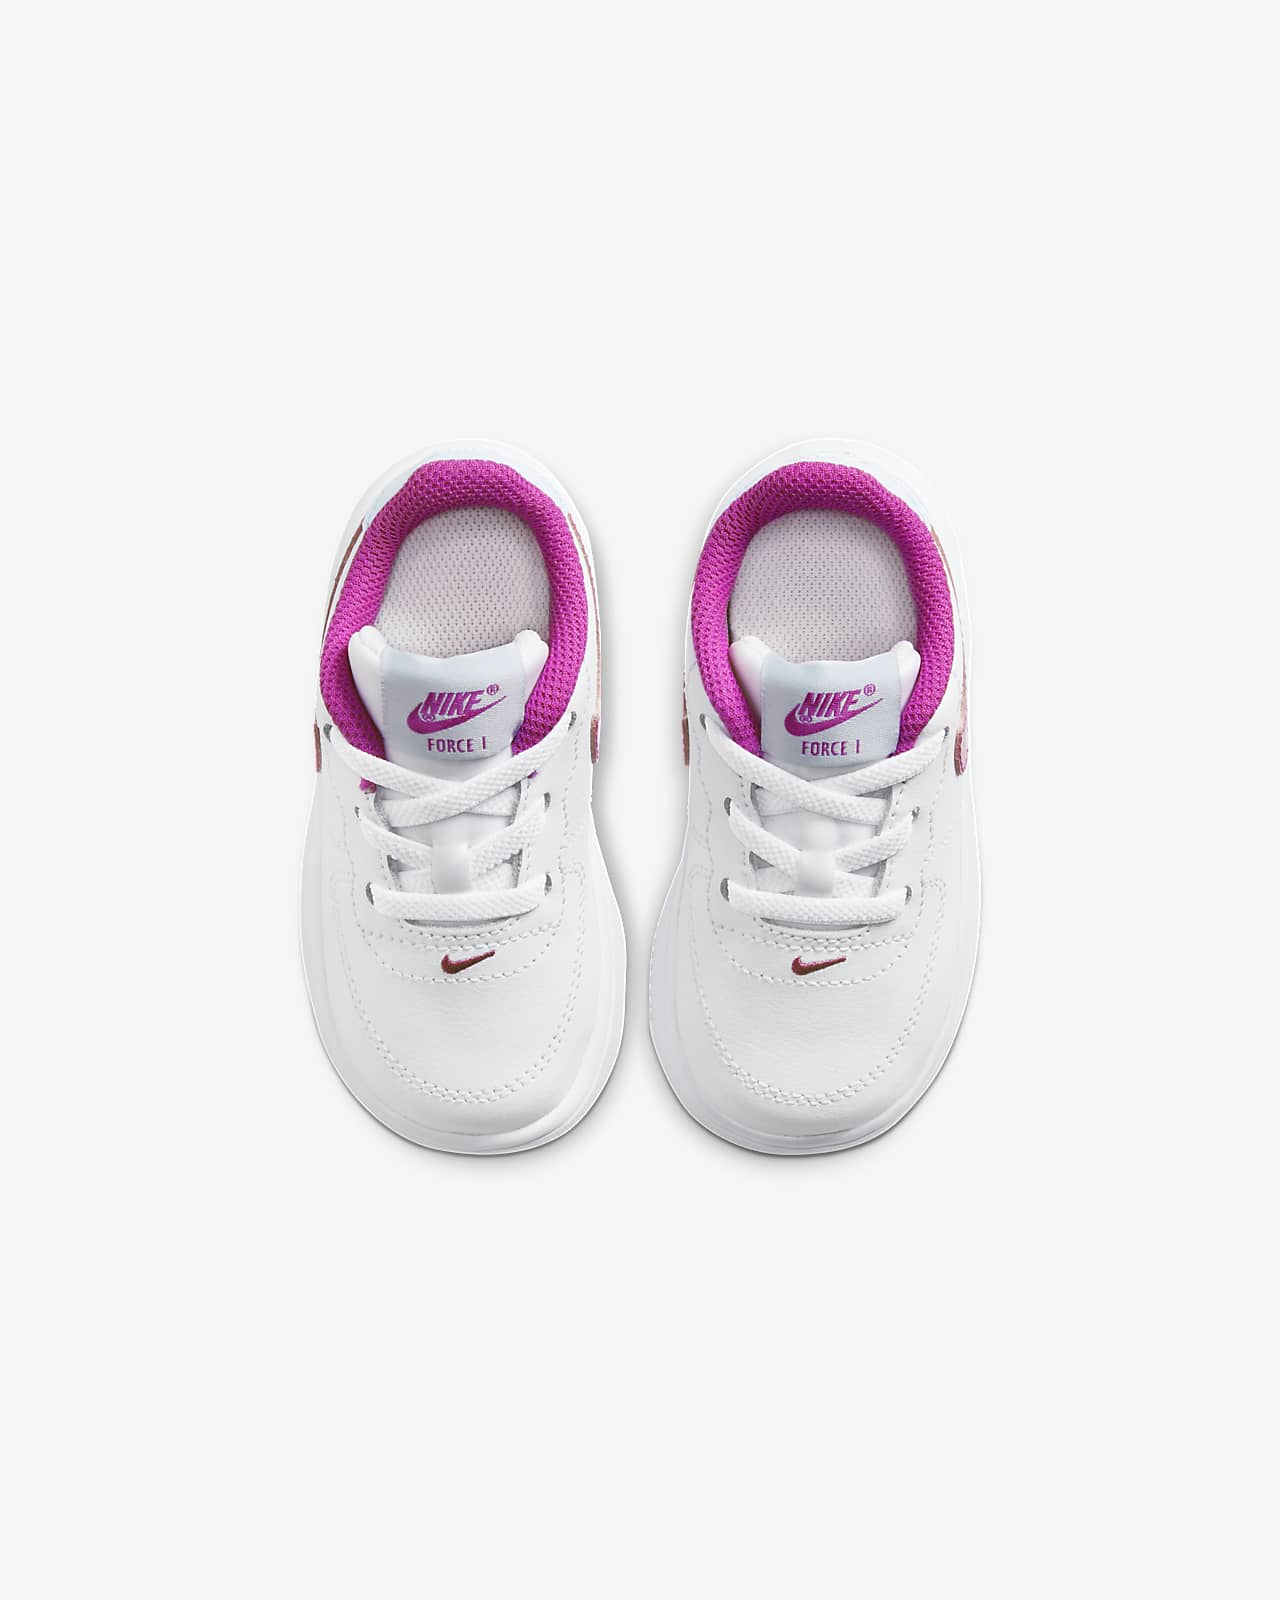 pink baby nike shoes